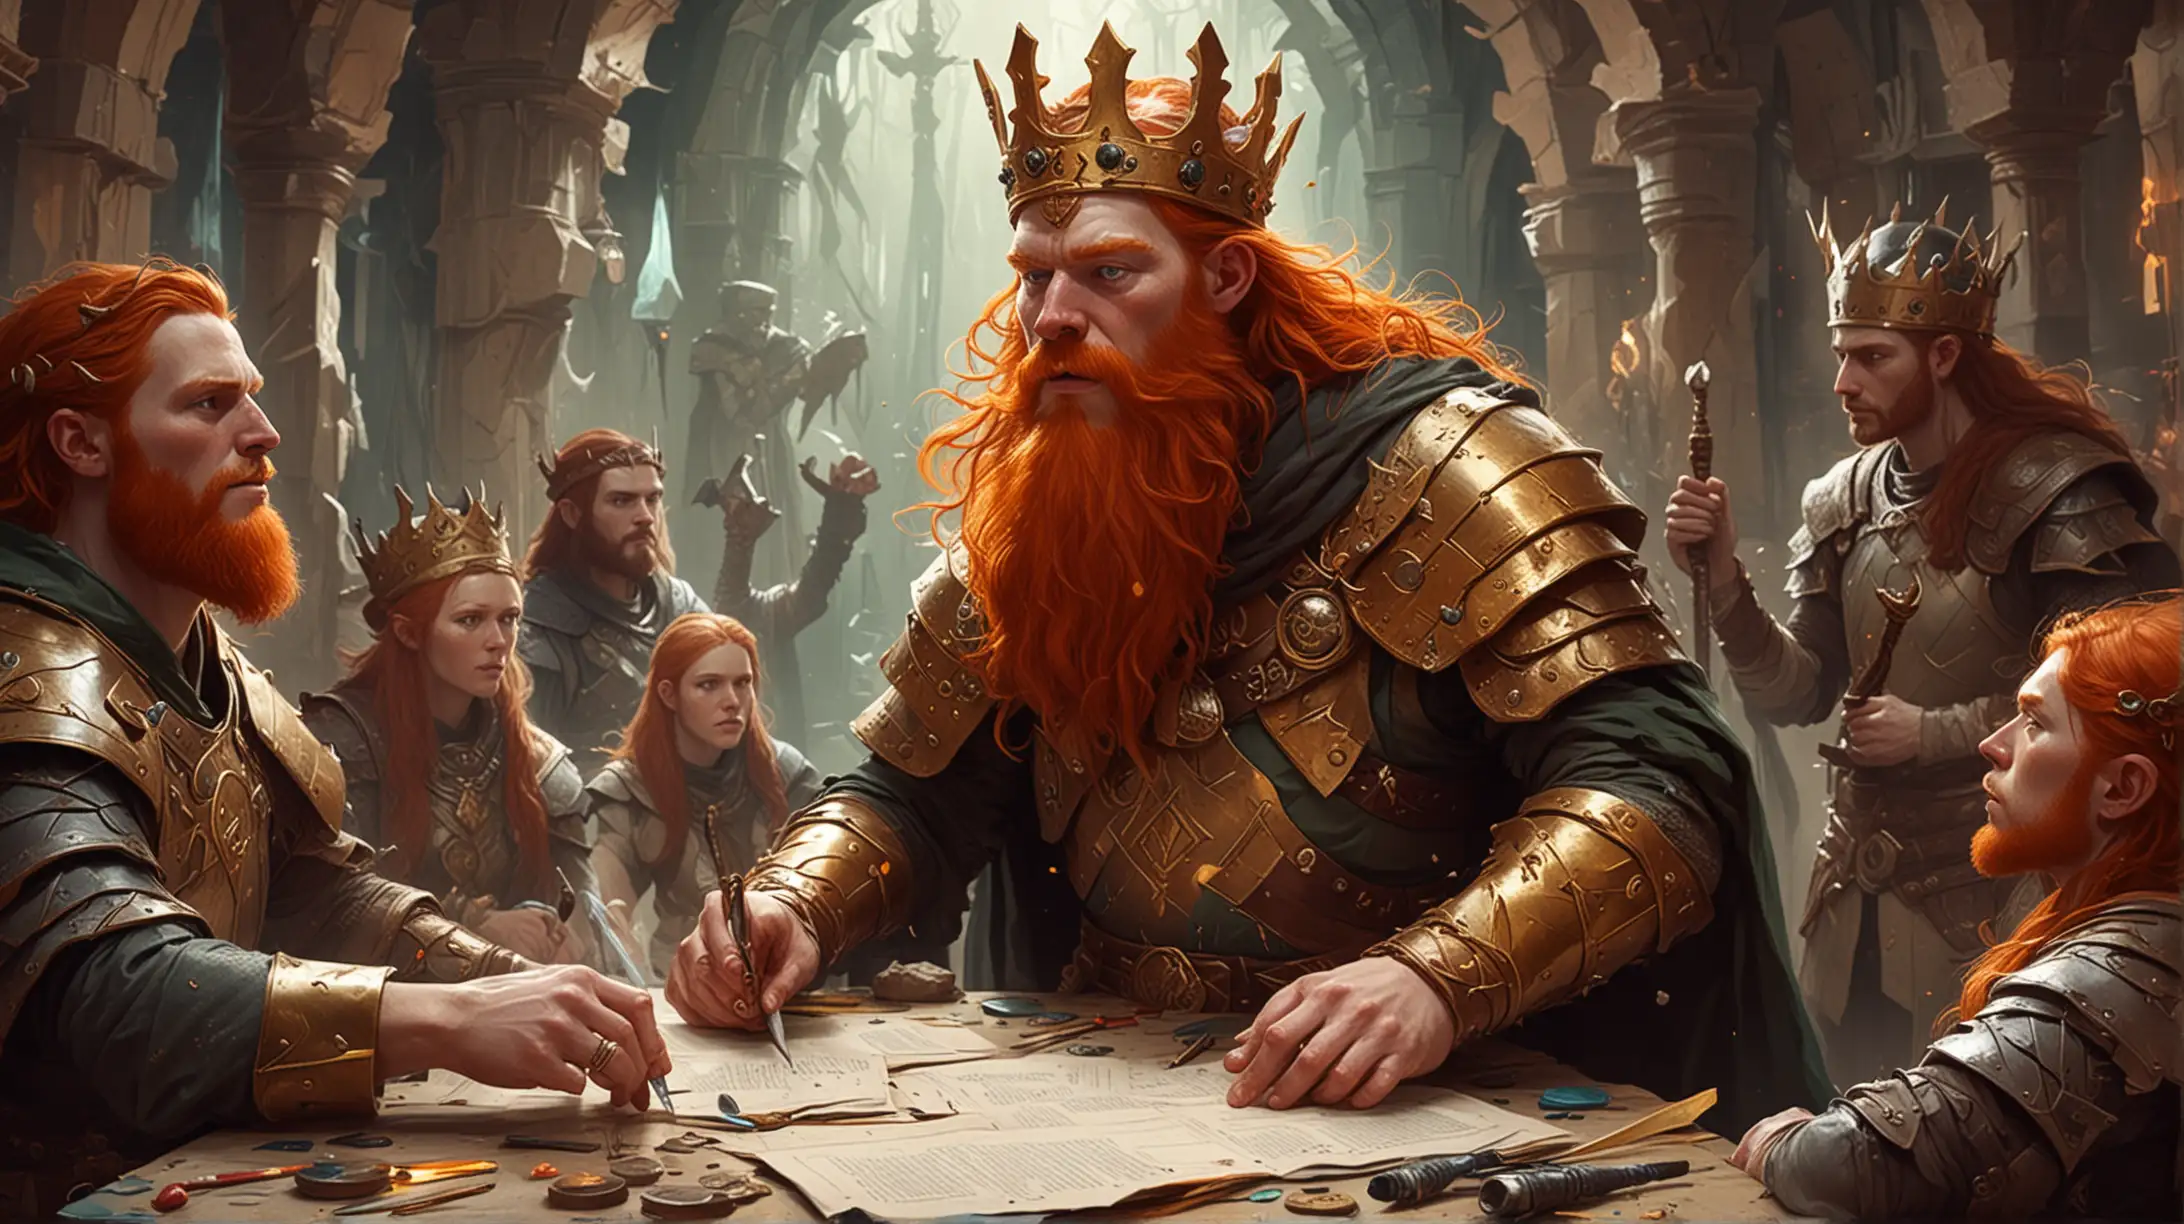 In an abstract art style, Ginge the God King runs a d&d session.